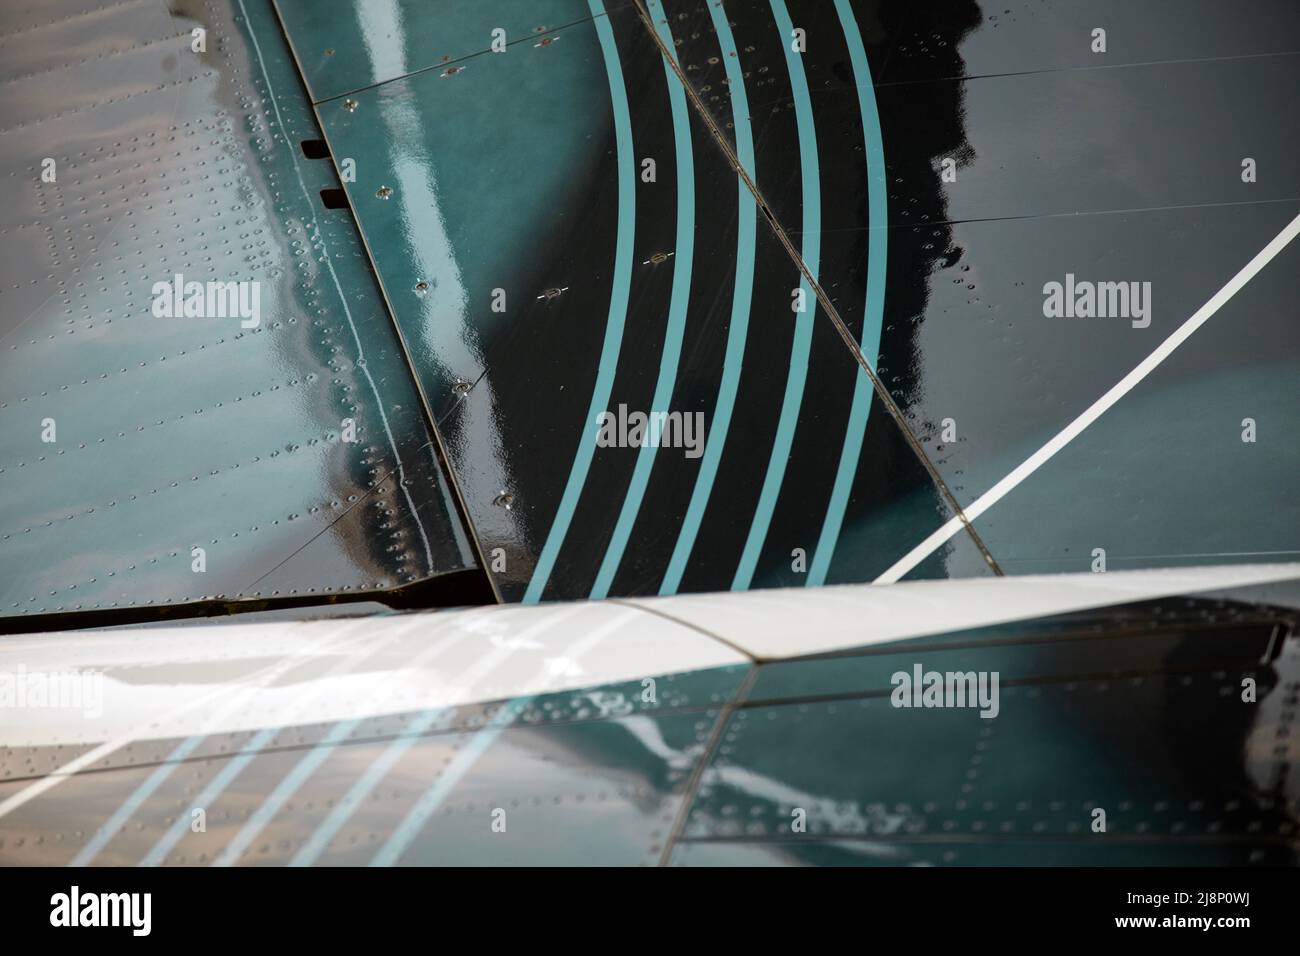 close up of a display aeroplane paint work and rivits at Manchester Airport's viewing platform, UK Stock Photo